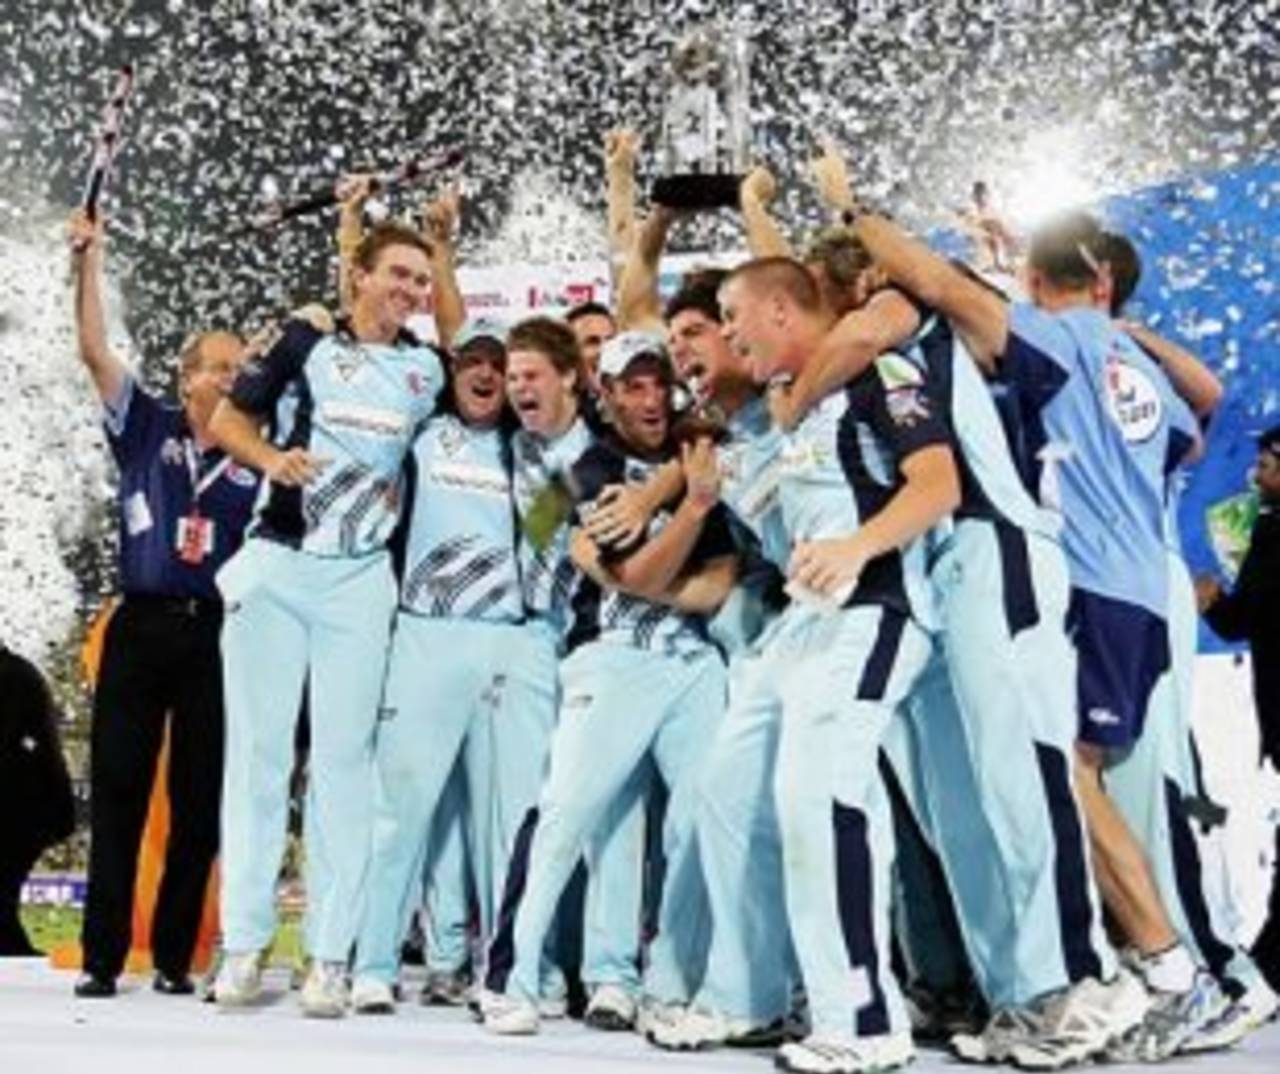 New South Wales celebrate their Champions League victory, New South Wales v Trinidad & Tobago, Champions League Twenty20 final, Hyderabad, October 23, 2009